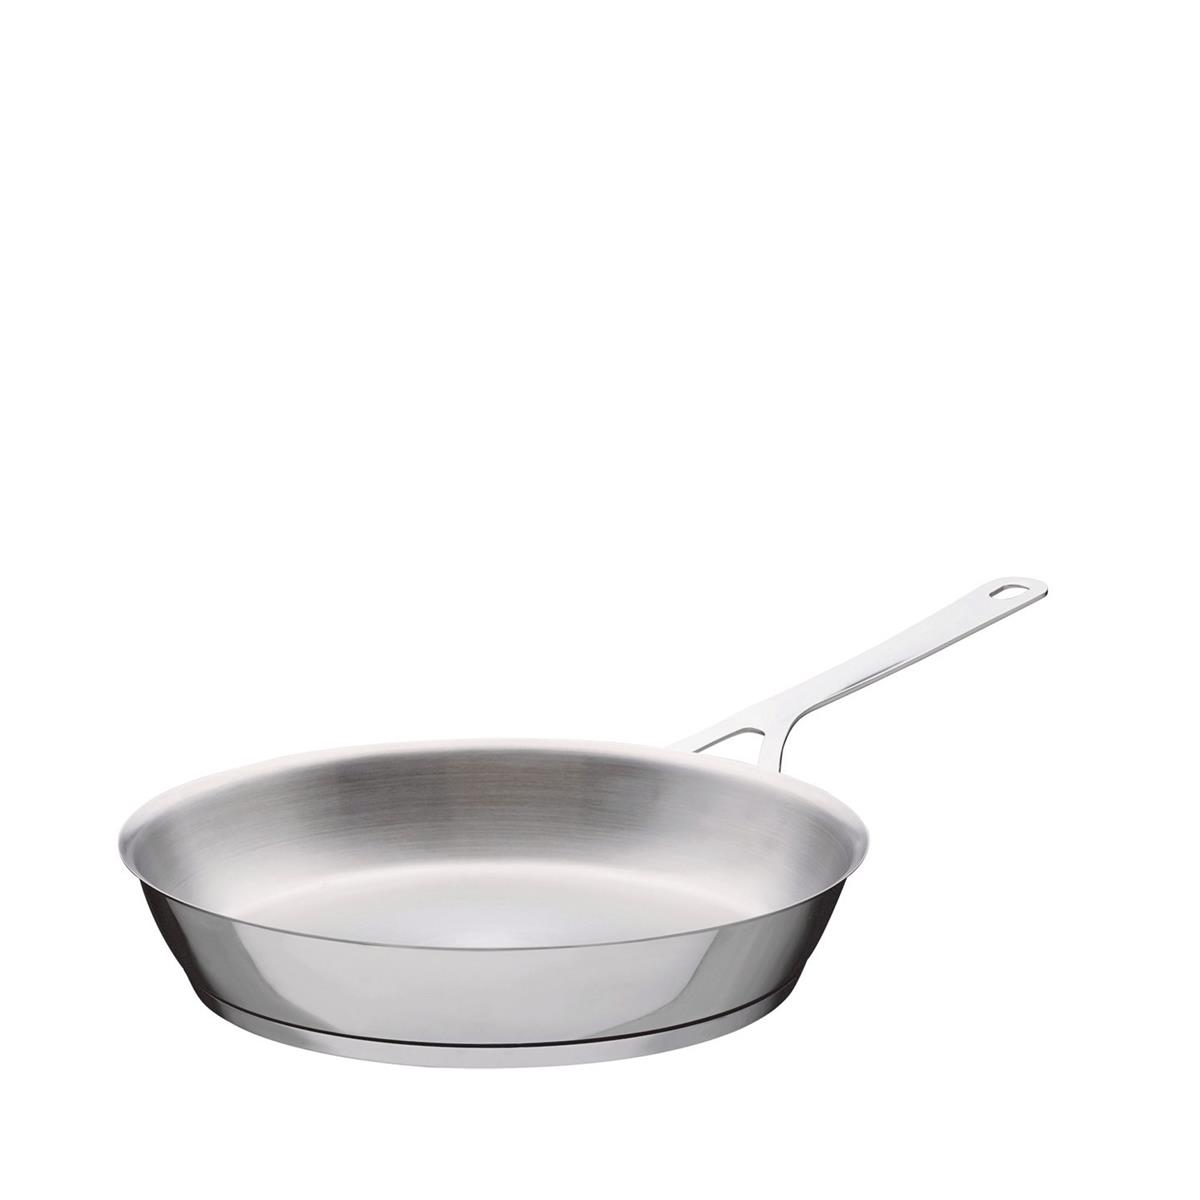 Alessi-Pots&Pans Long-handled pan in 18/10 stainless steel suitable for induction